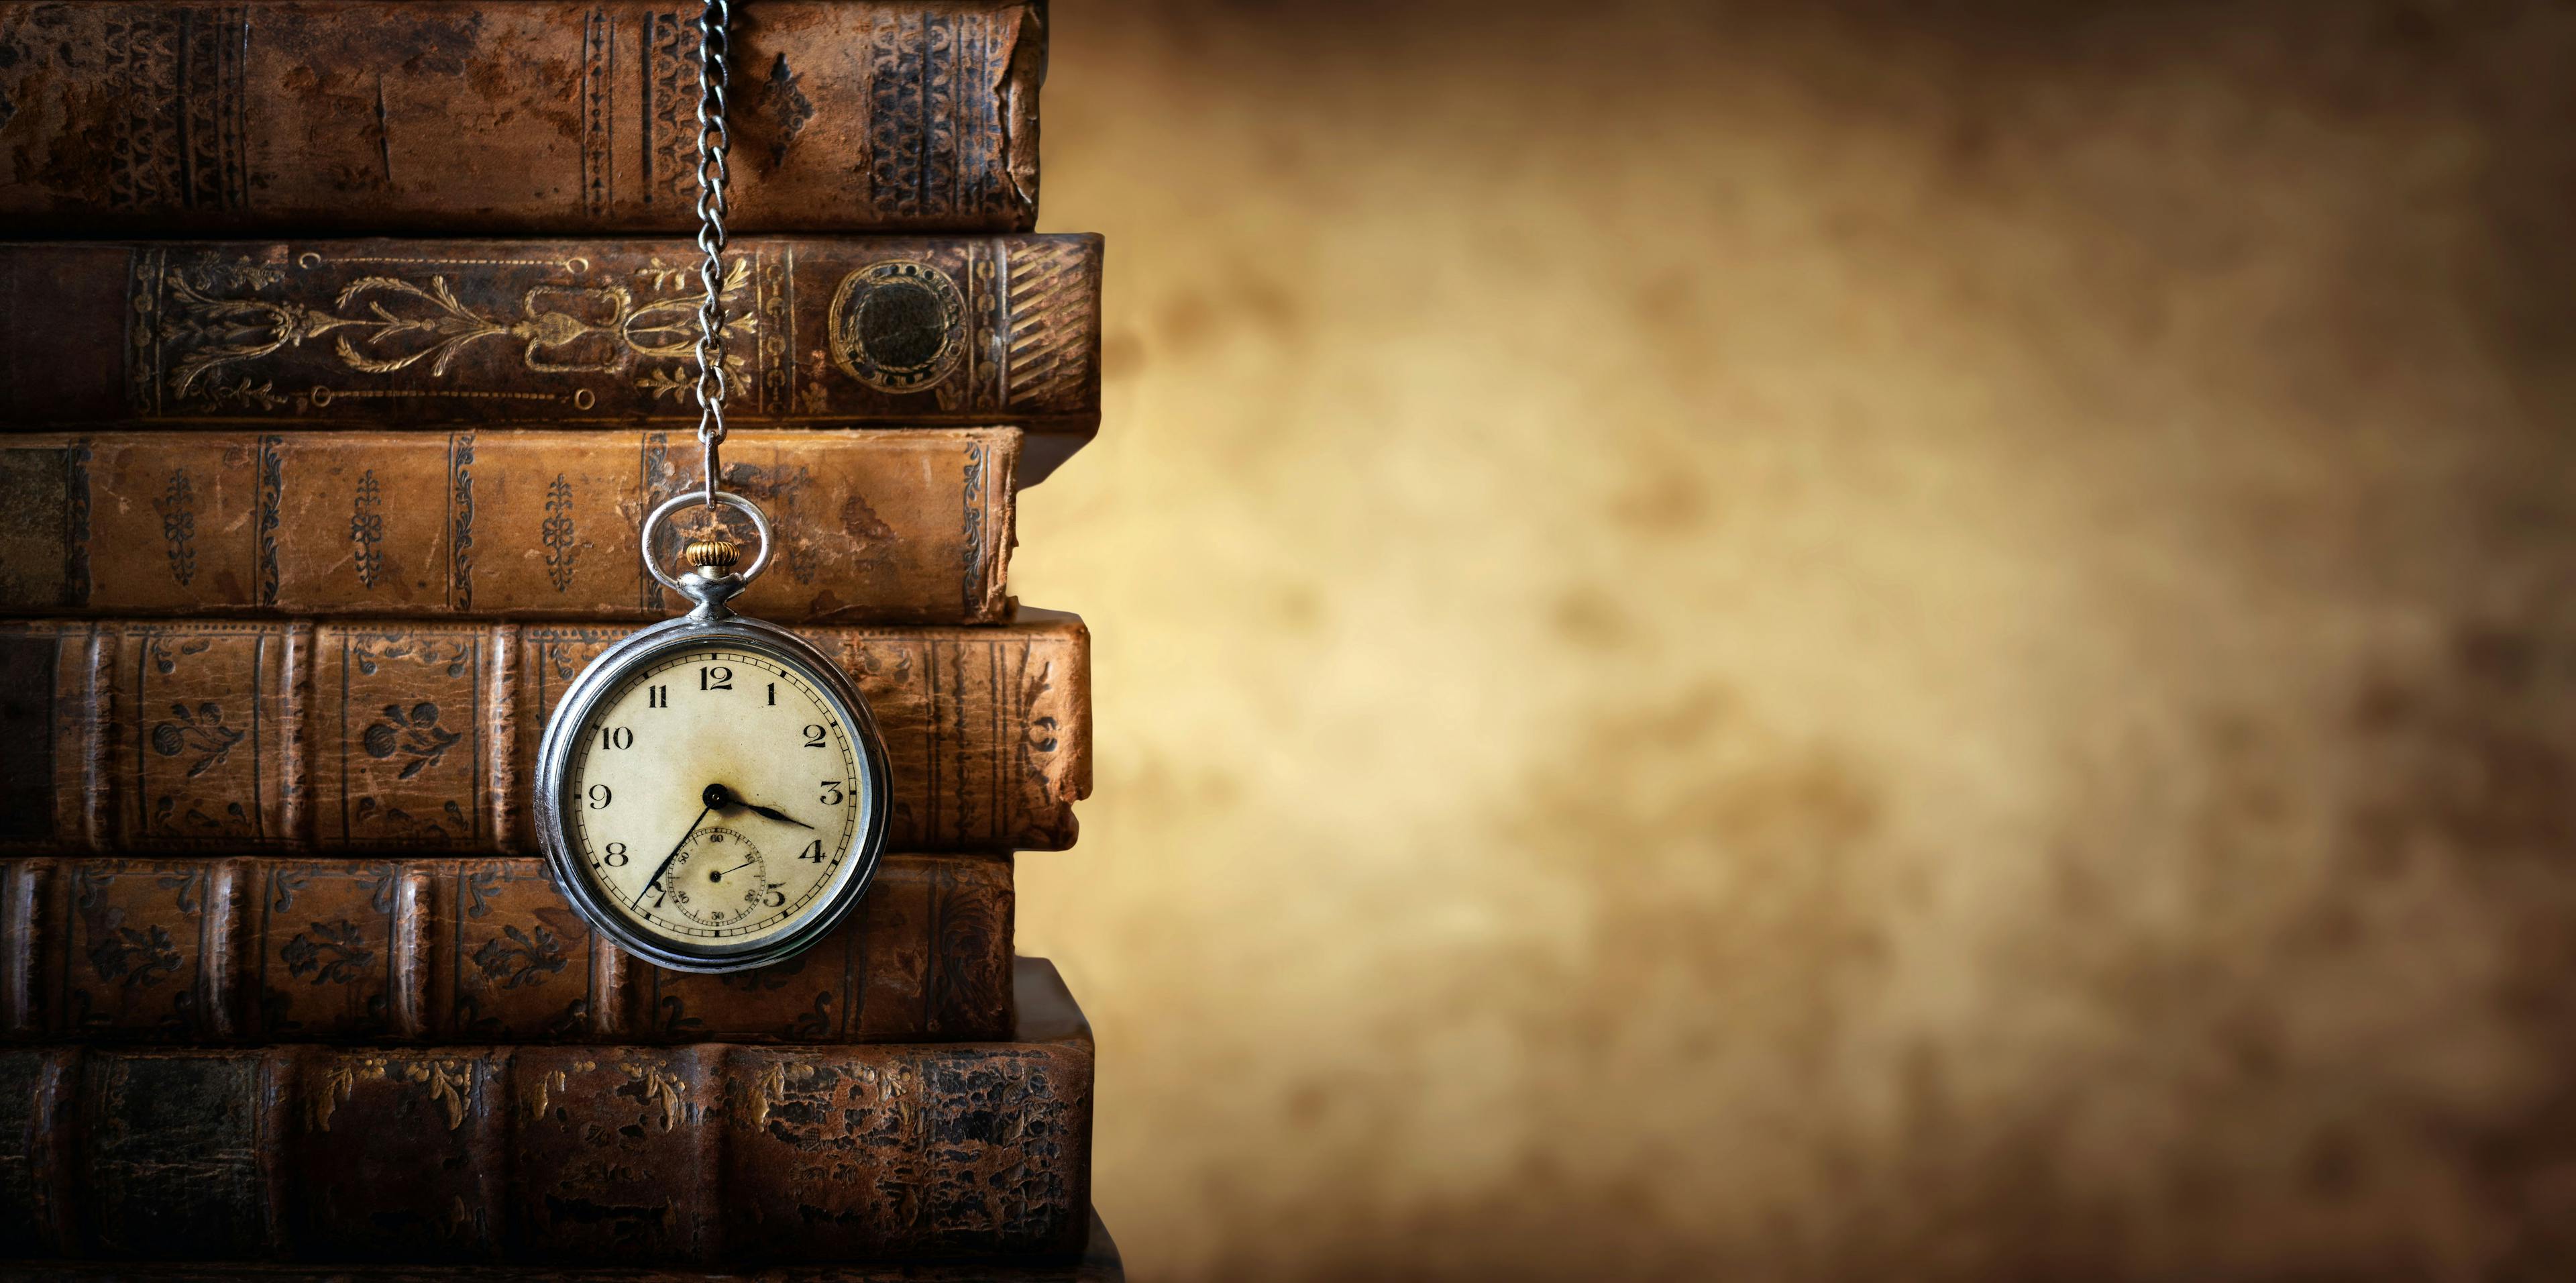 Vintage clock hanging on a chain on the background of old books. Old watch as a symbol of passing time. Concept on the theme of history, nostalgia, old age. Retro style | Image Credit: © Tryfonov - stock.adobe.com 